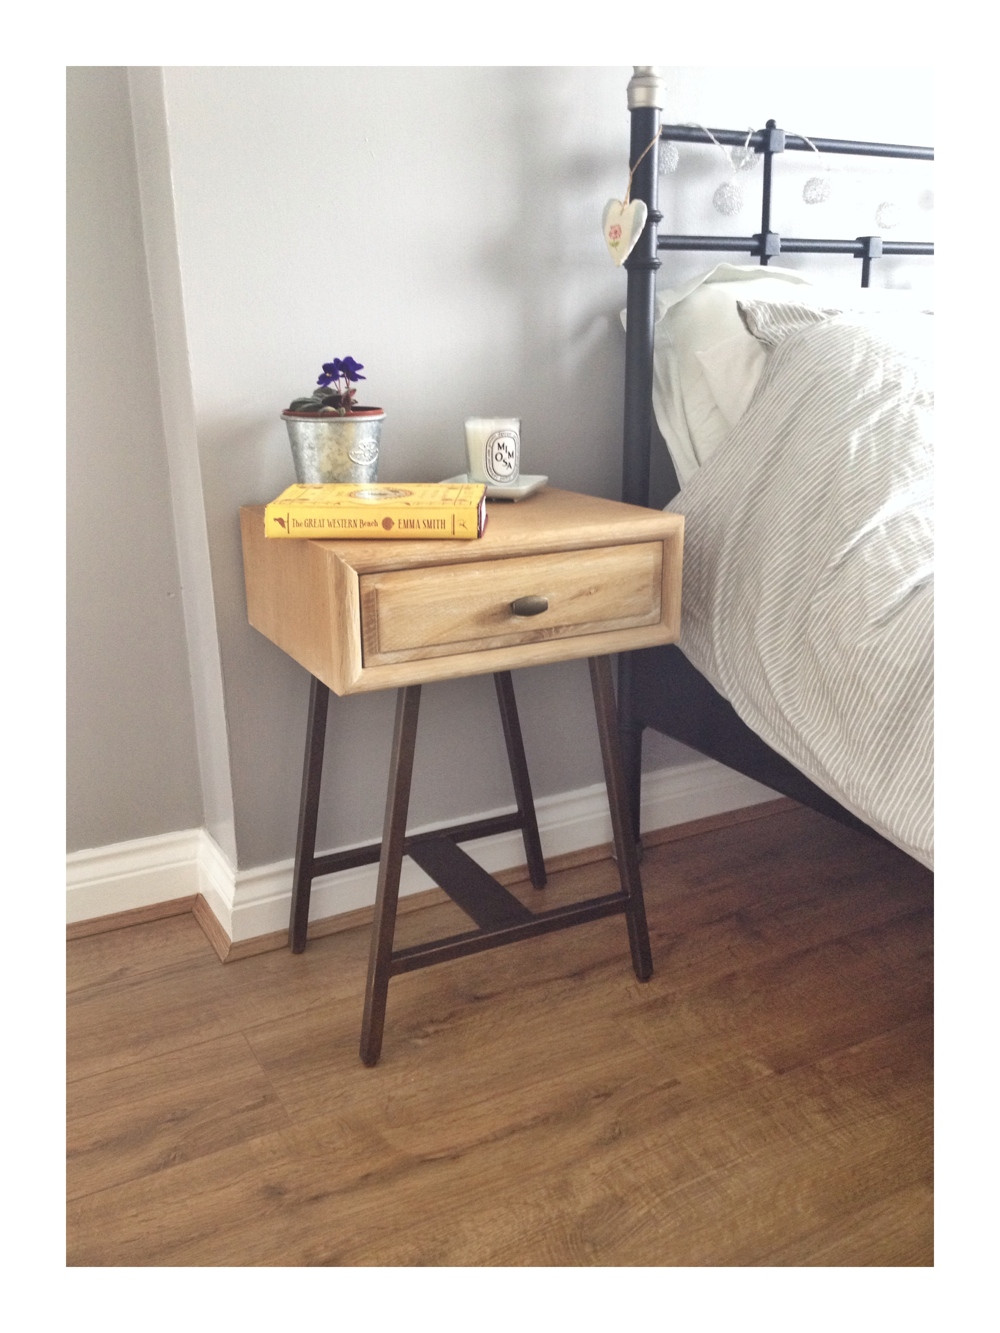 Small Bedroom Table
 Bedroom makeover update – the bedside table